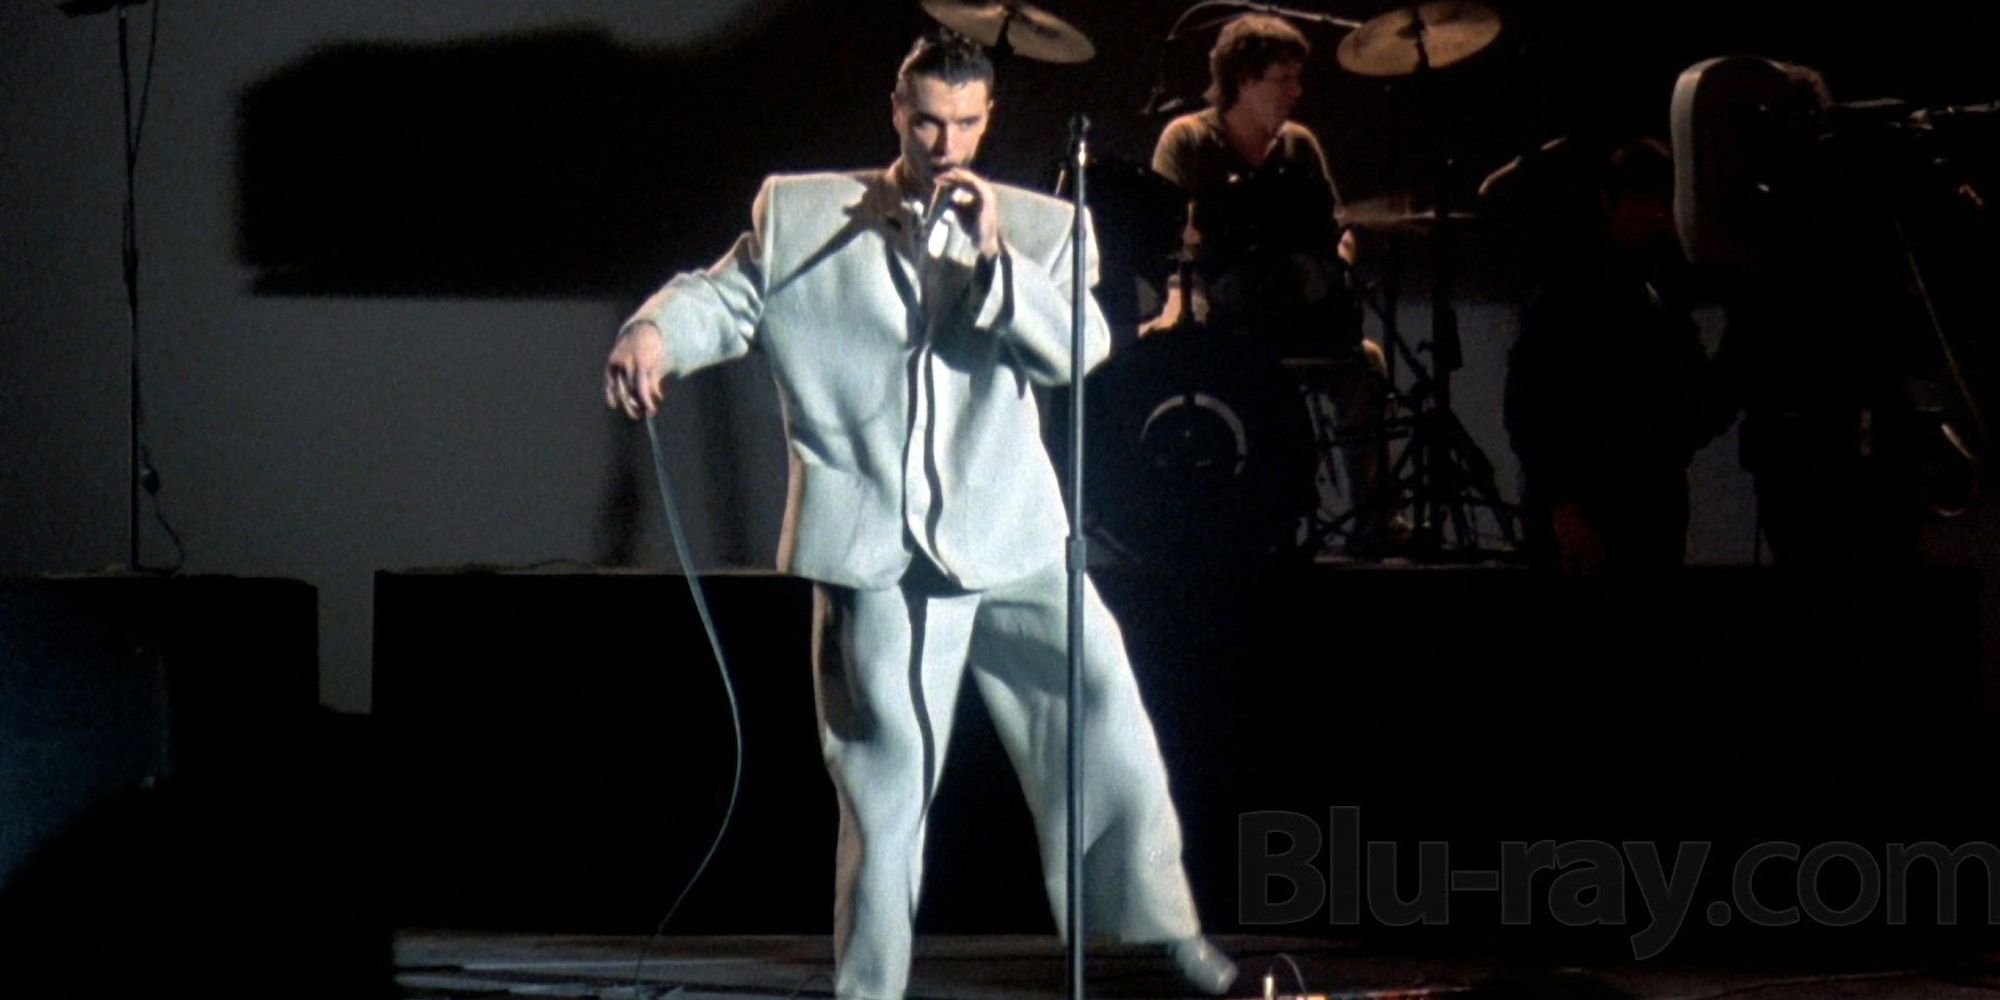 David Byrne dances in his iconic big suit in 'Stop Making Sense'